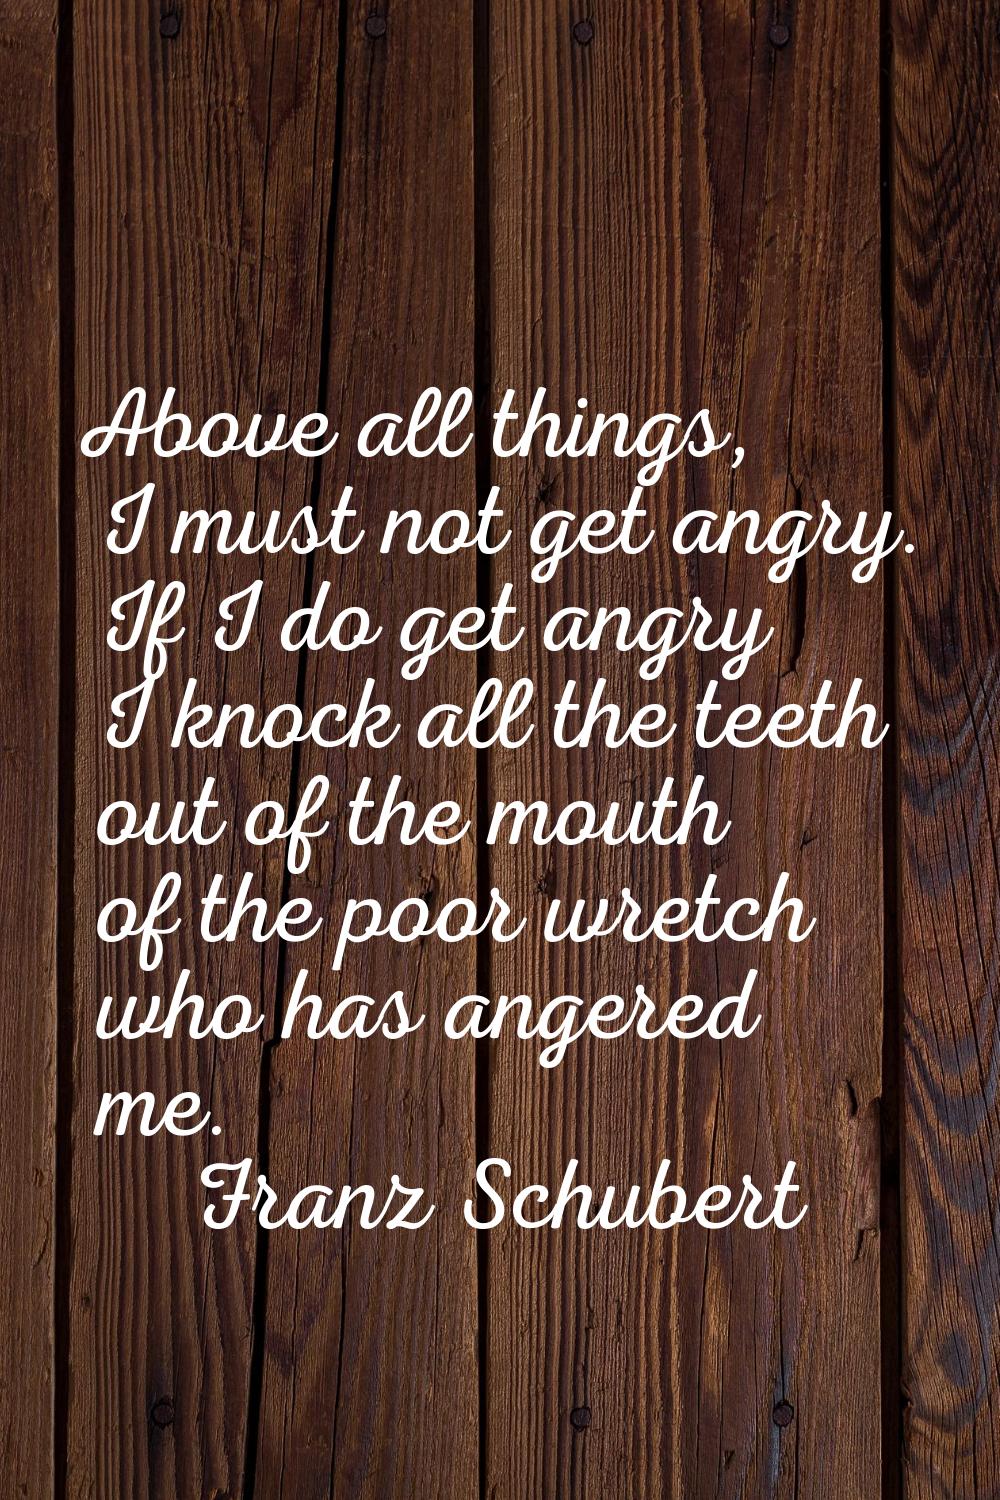 Above all things, I must not get angry. If I do get angry I knock all the teeth out of the mouth of